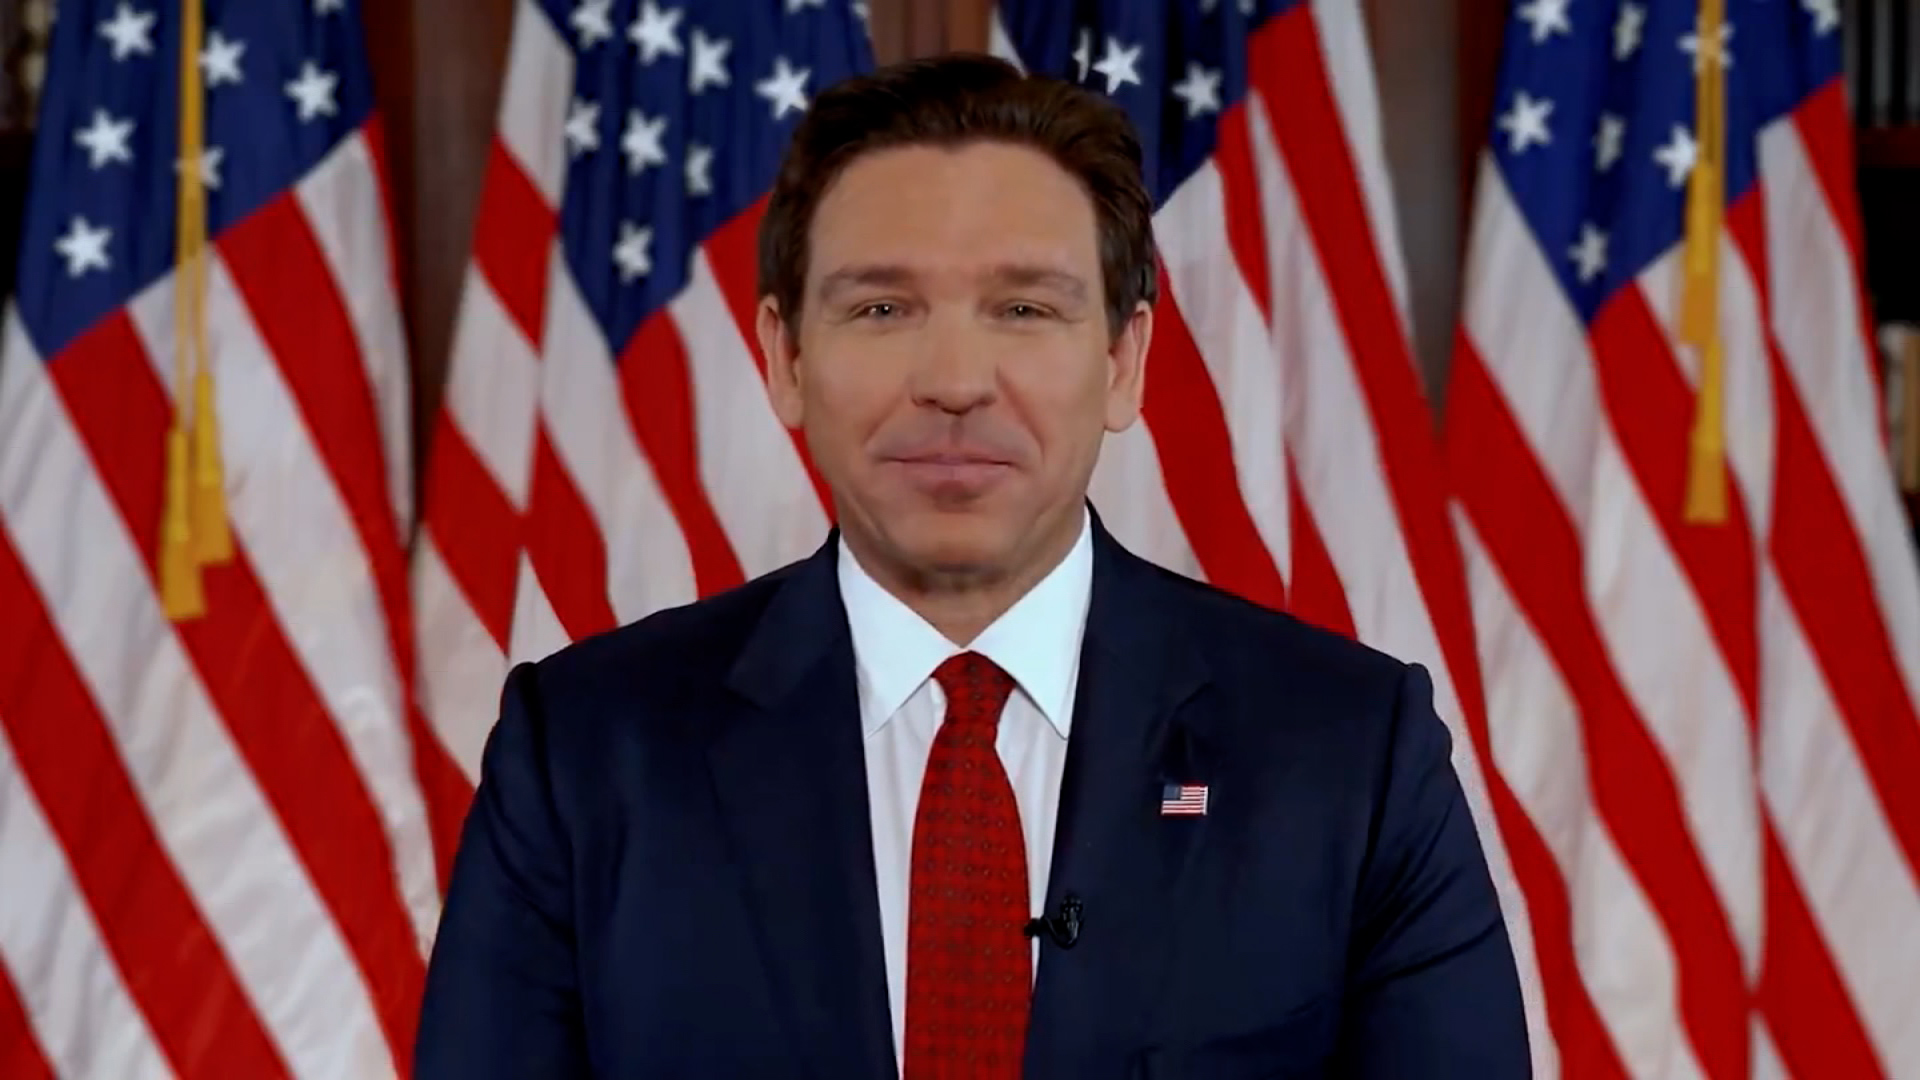 Florida Gov. Ron DeSantis announces he is dropping out of the presidential race in a video posted to X on January 21.